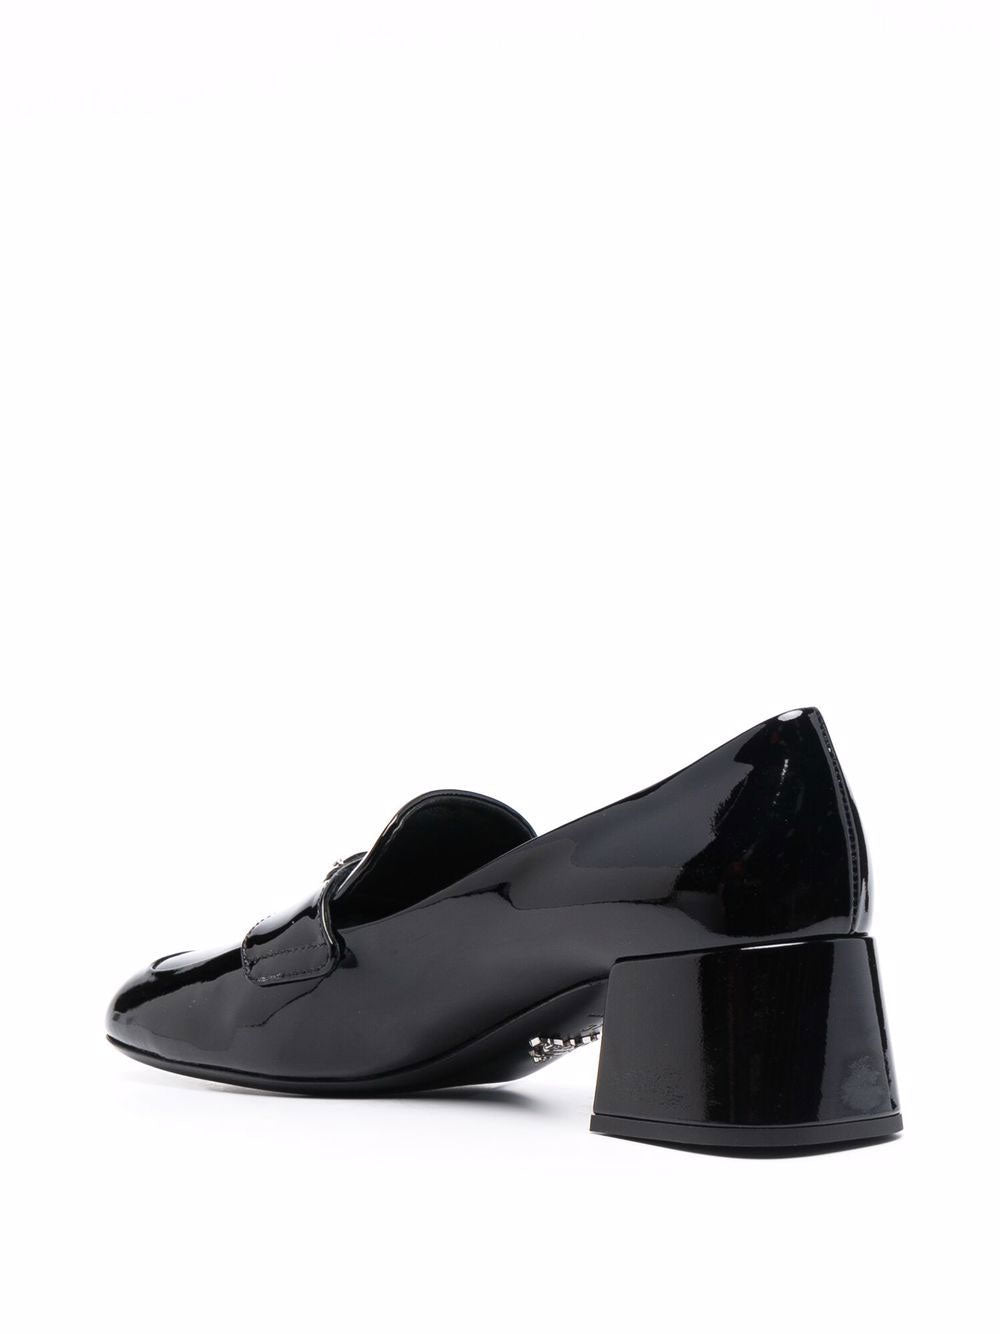 Triangle-logo patent leather loafers